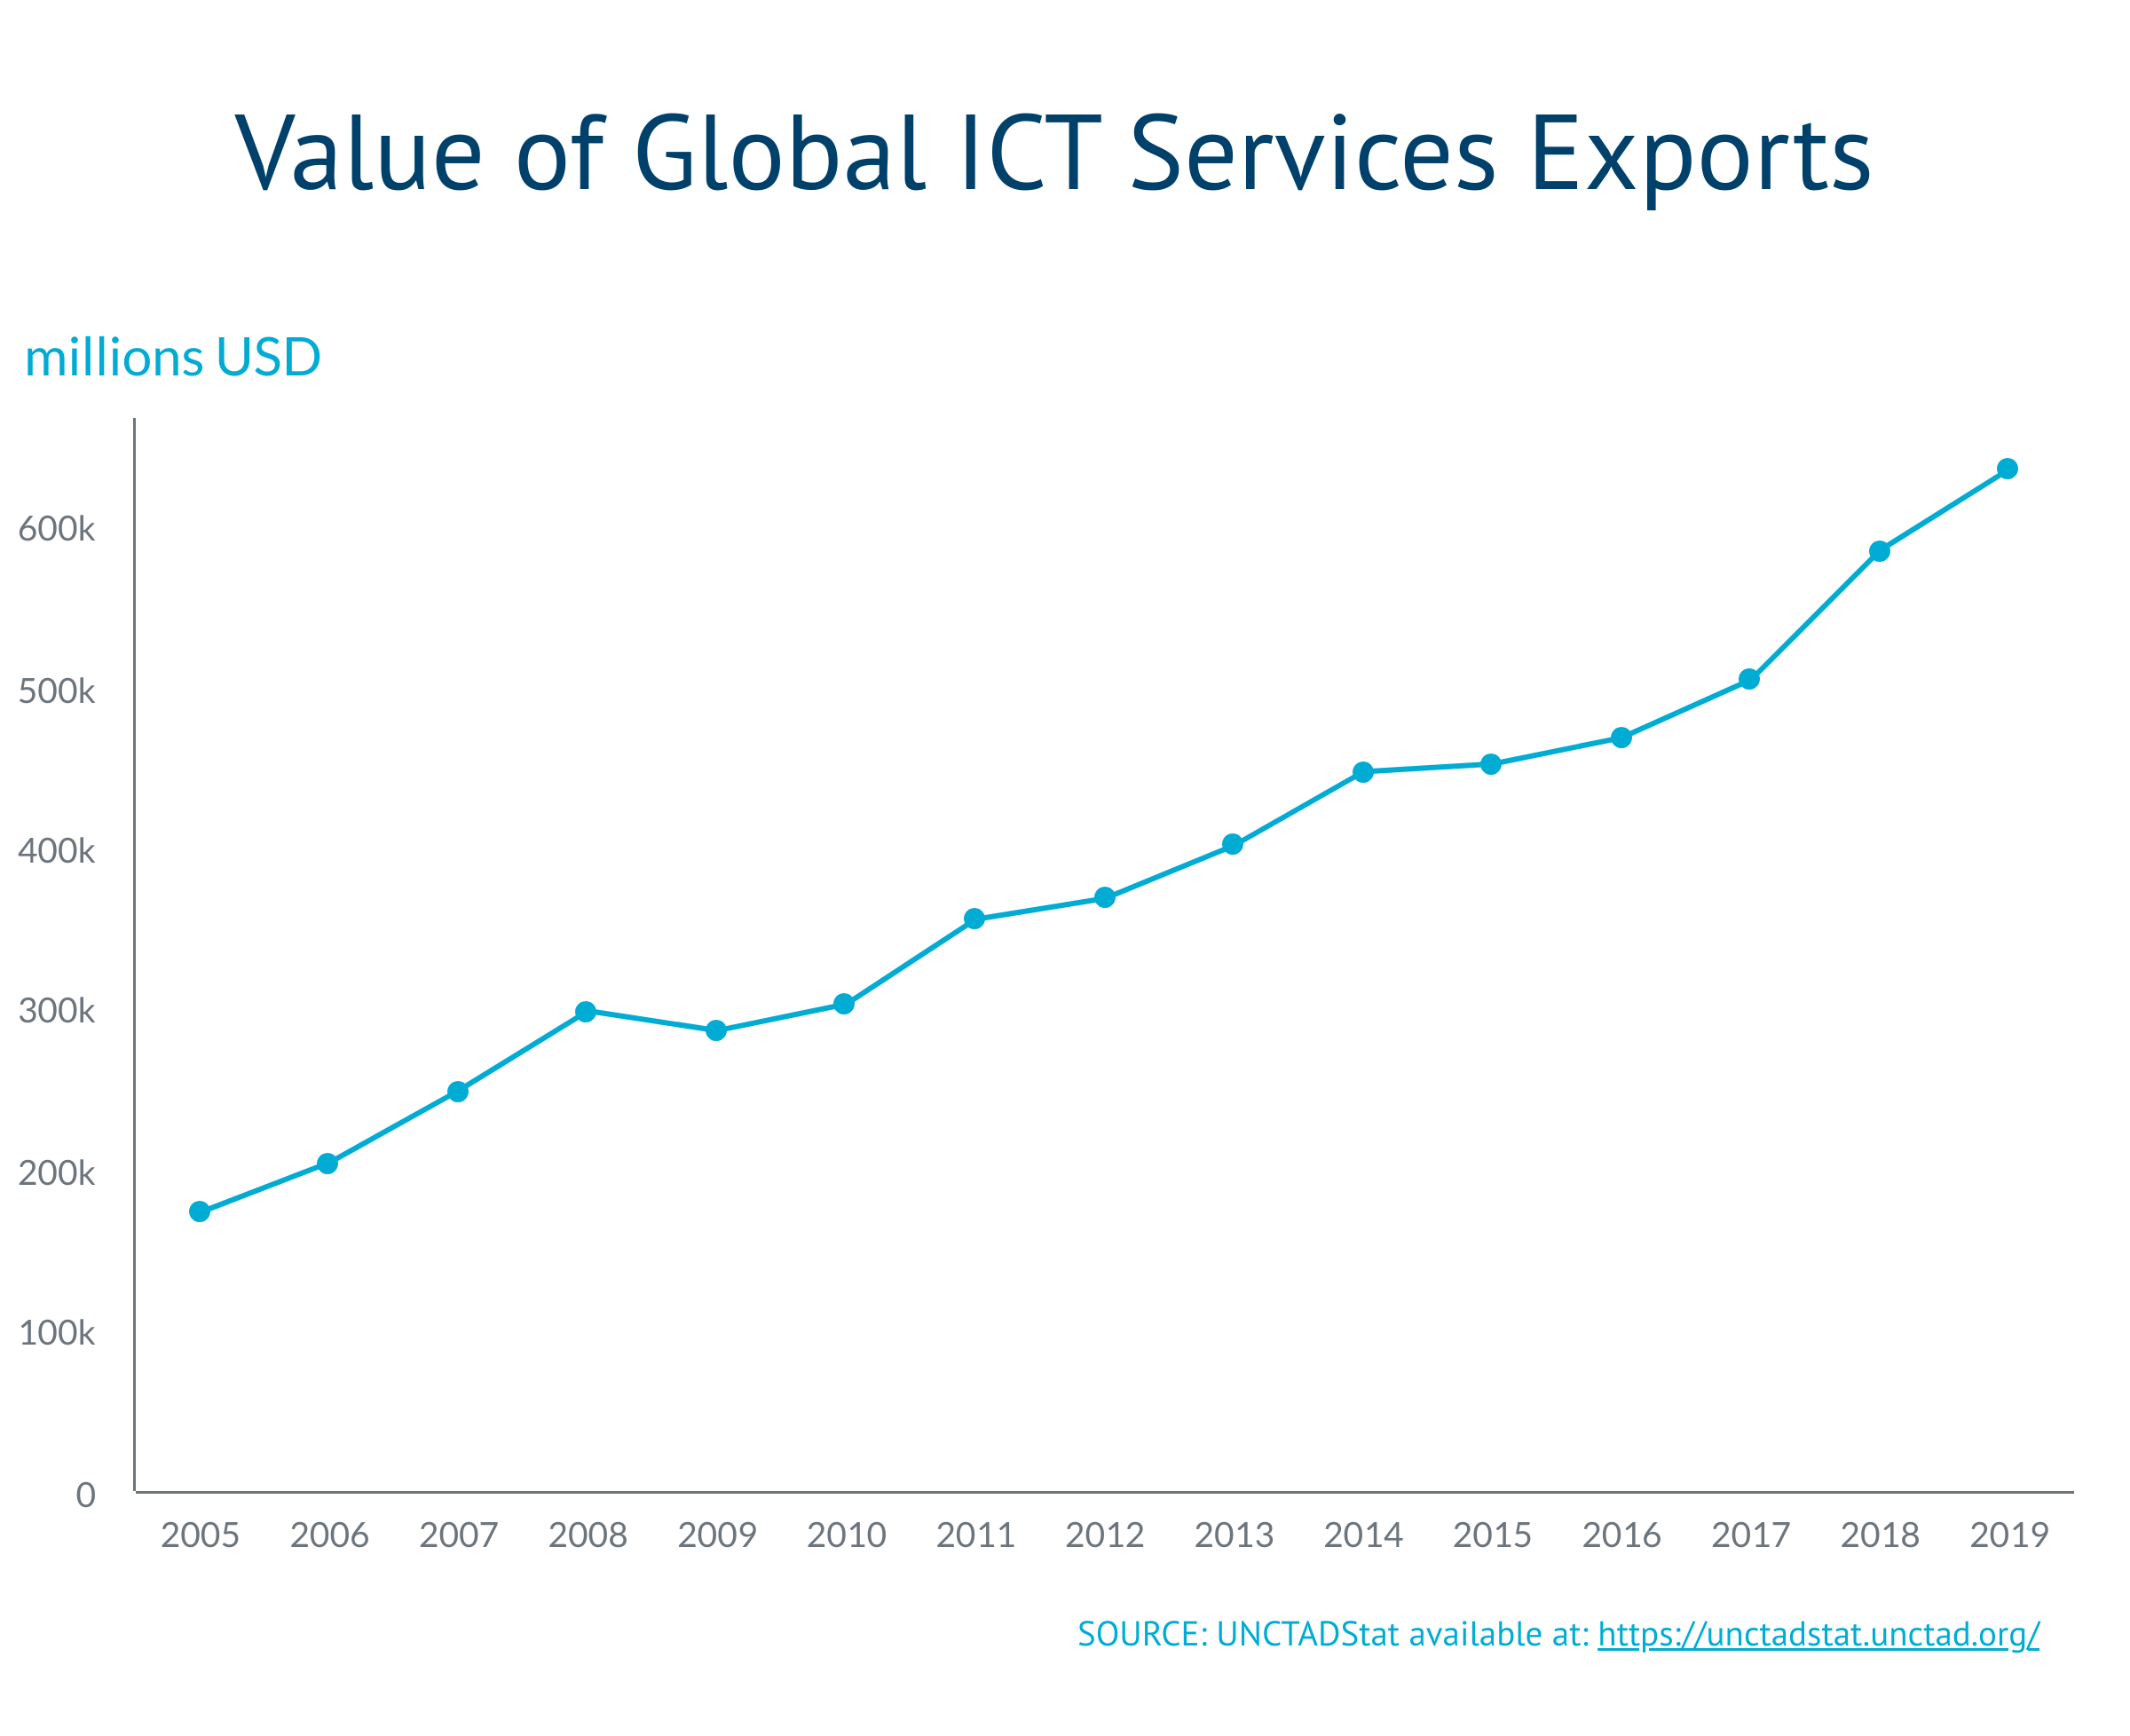 Global ICT Services Exports